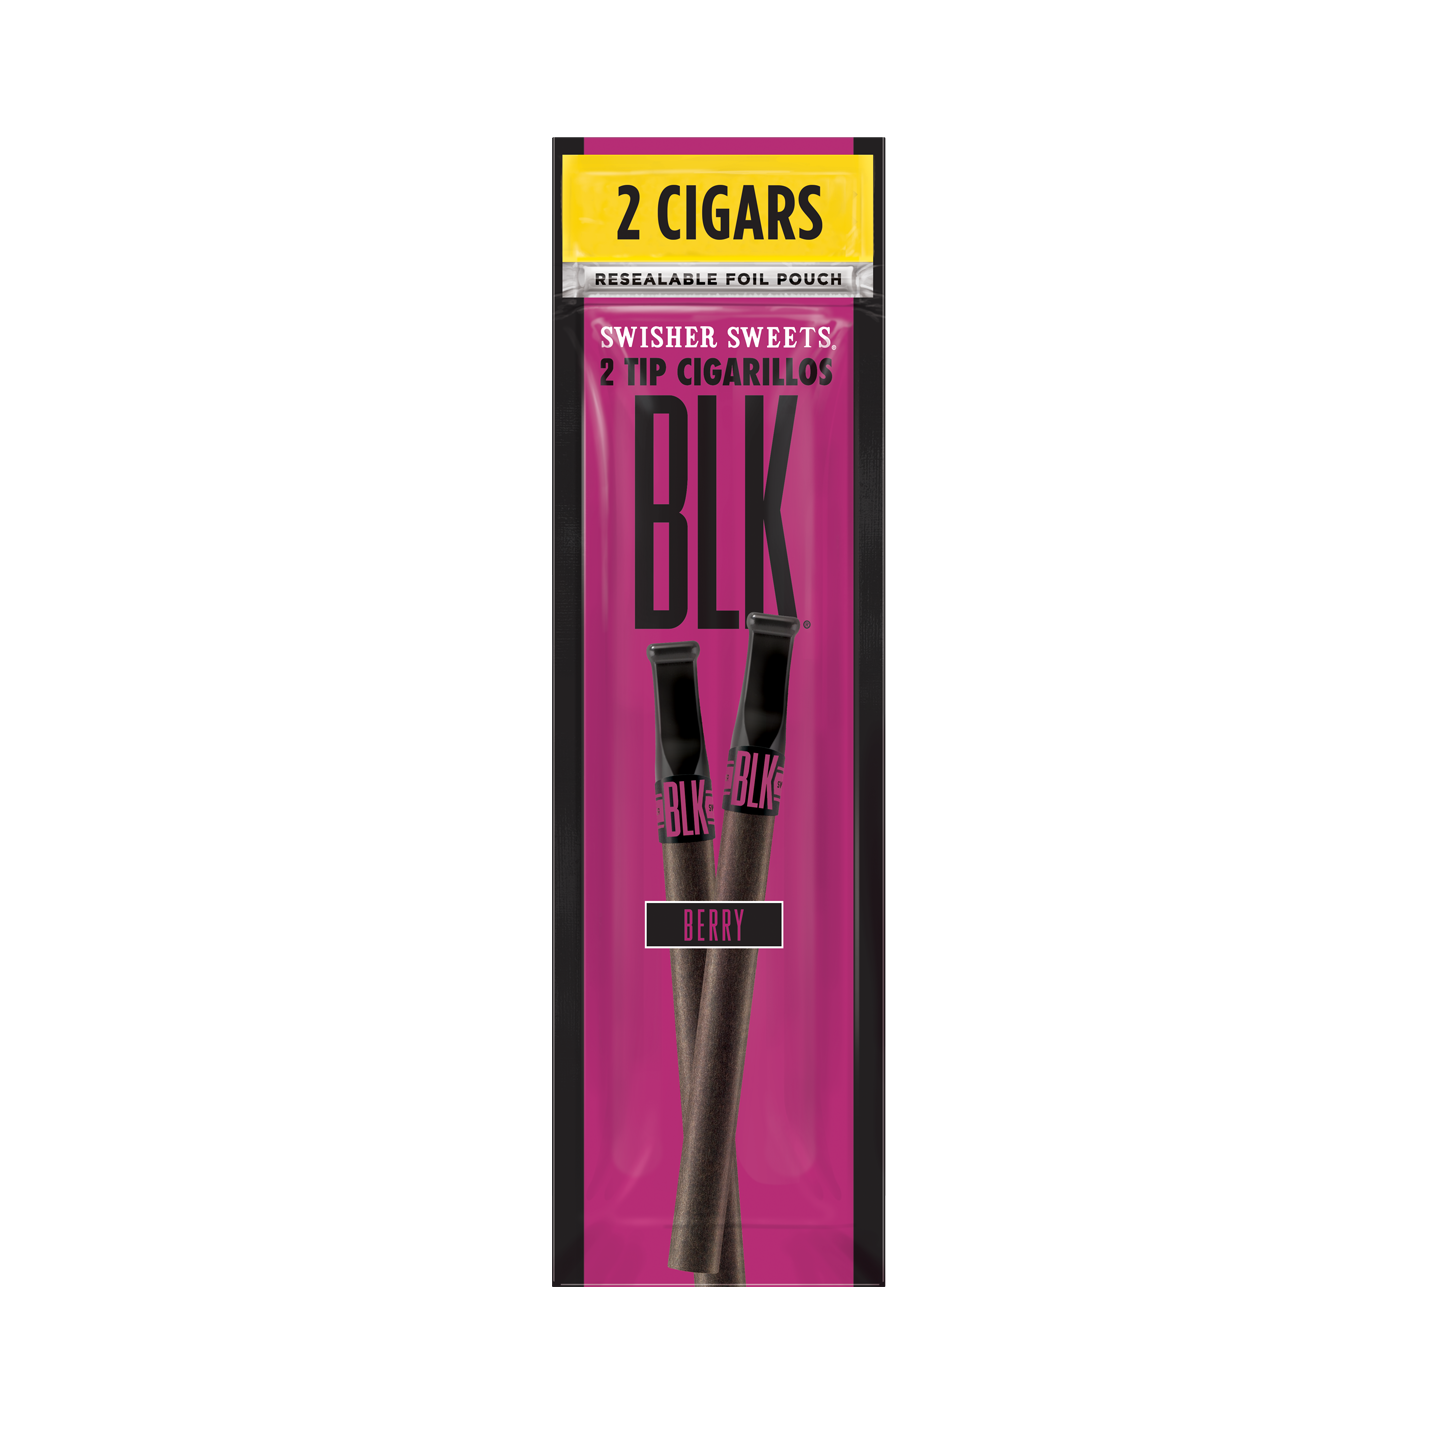 SWISHER SWEETS BLK Berry